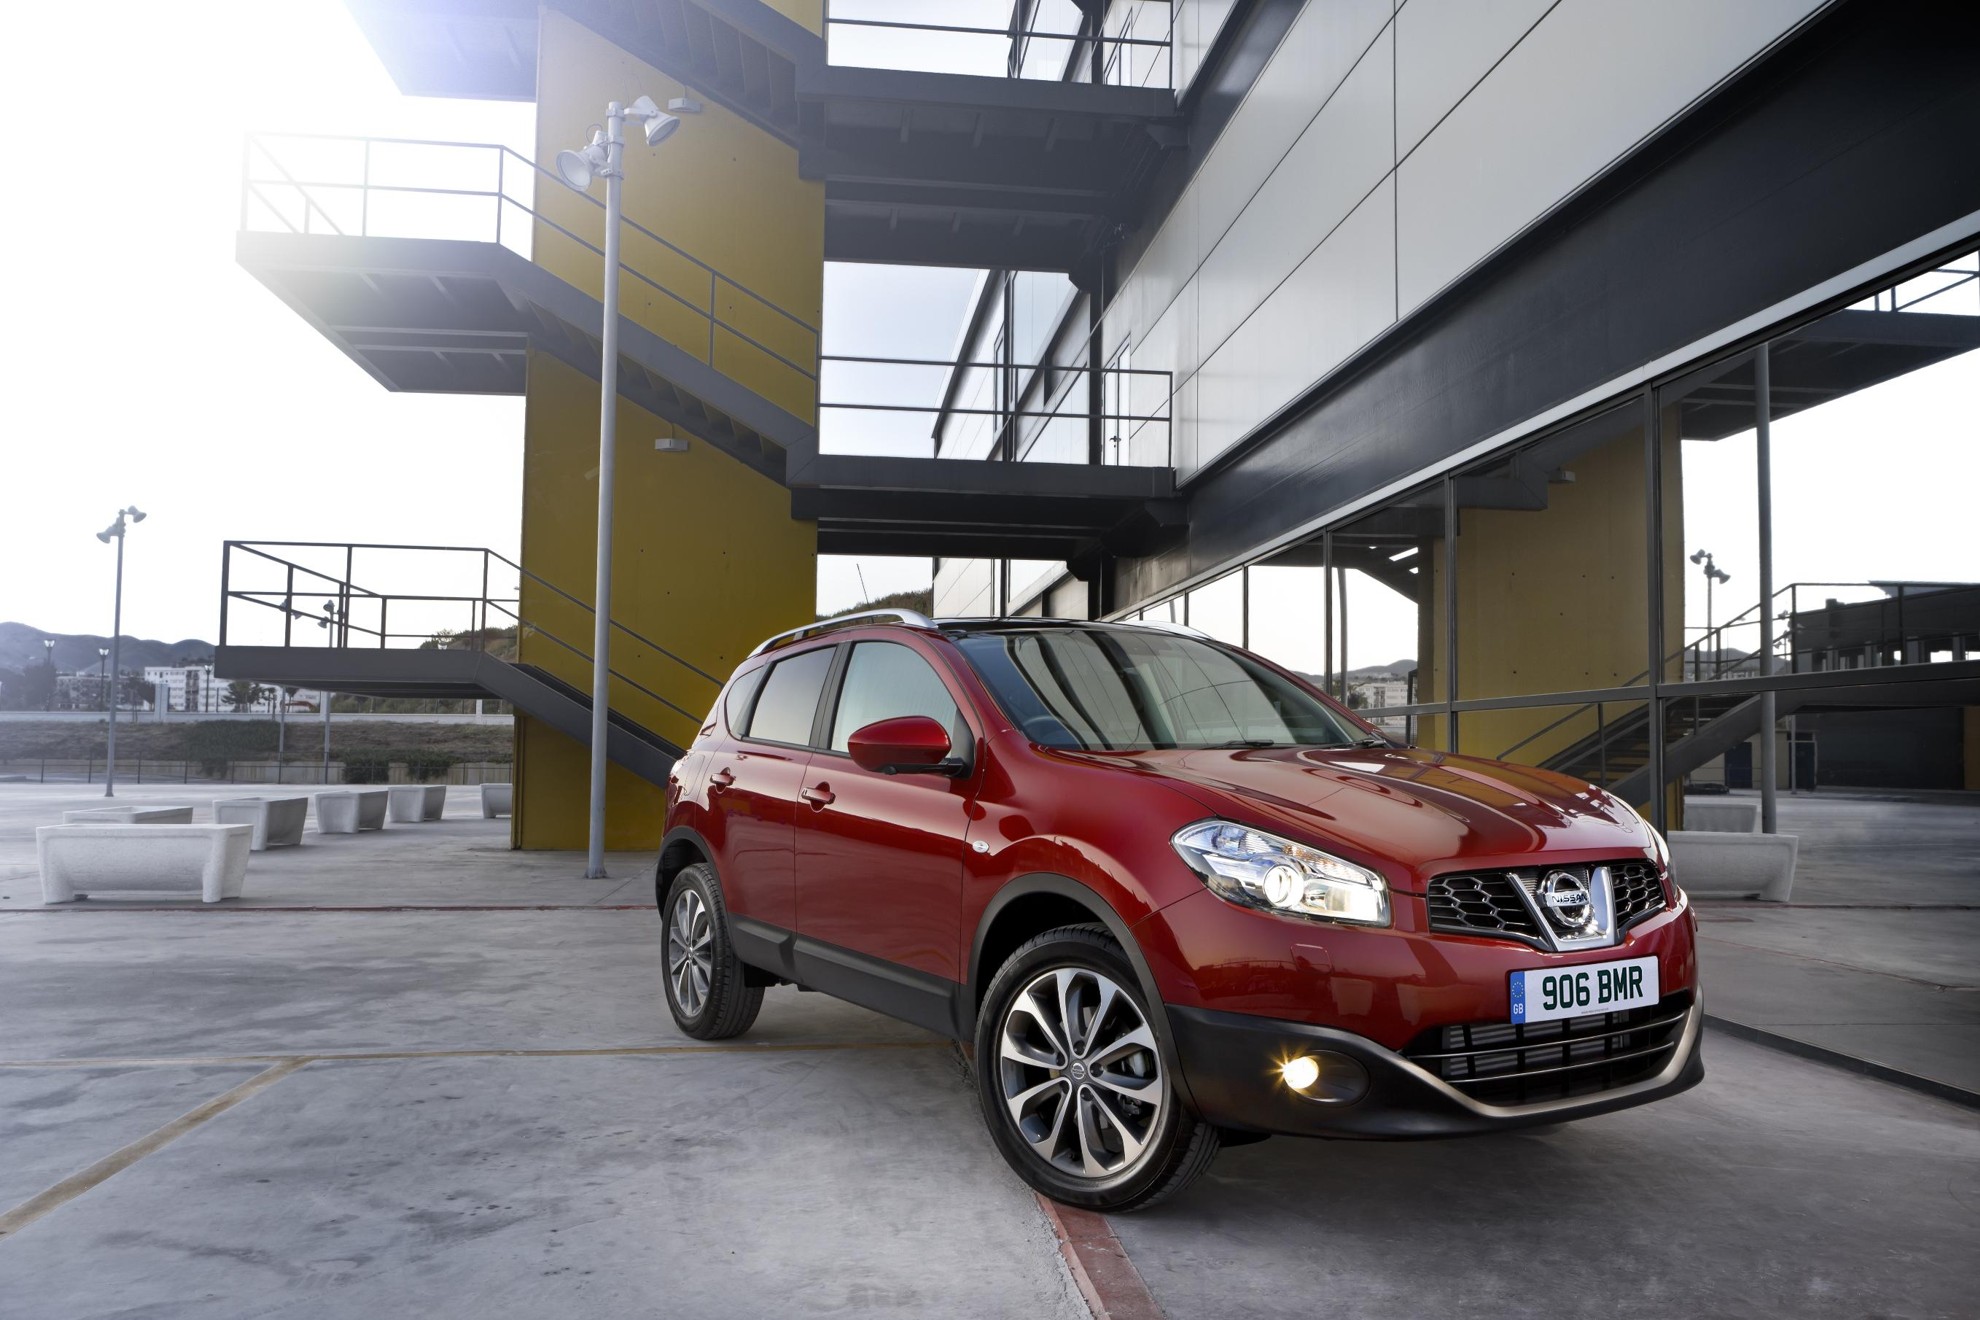 BRITISH BUILT QASHQAI TAKES BUSINESS CAR 2013 “CROSSOVER OF THE YEAR” CROWN